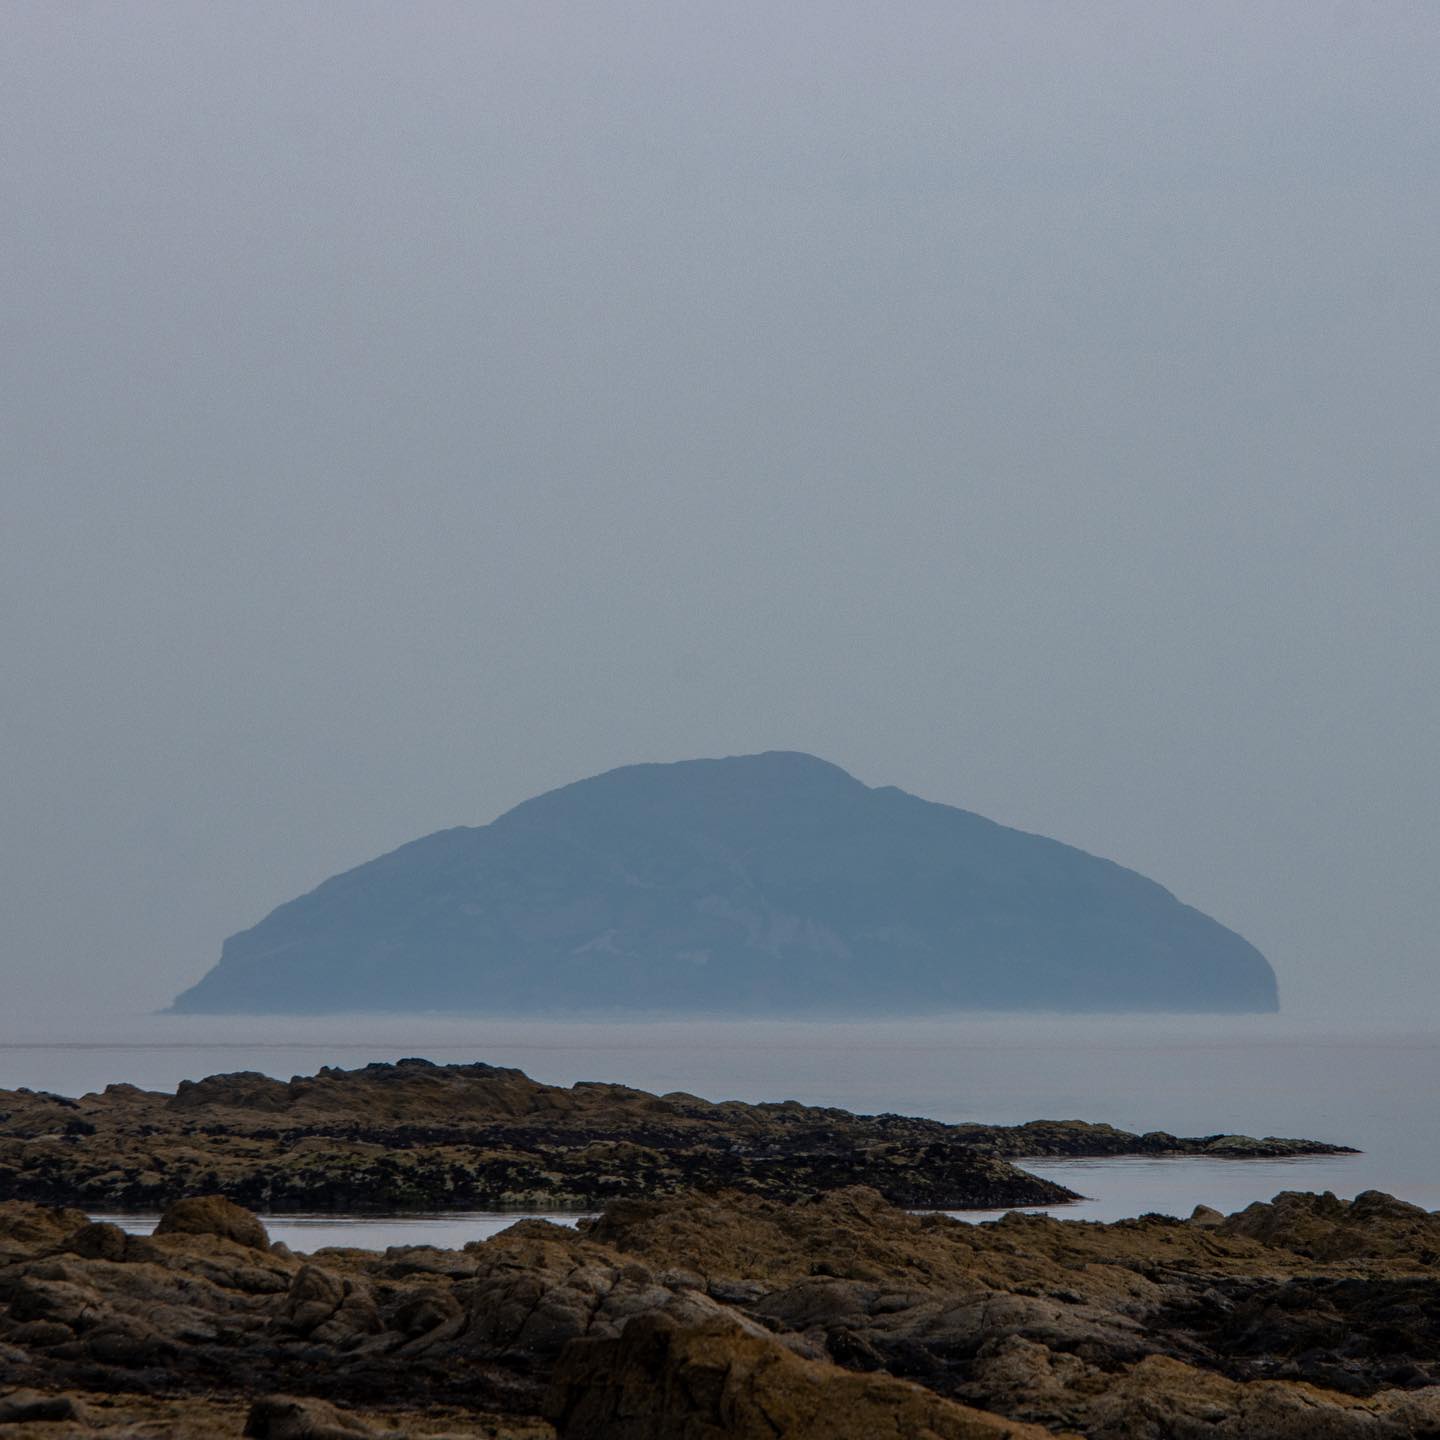 Ailsa Craig from maidens, Ailsa Craig is an island of 99 hectares (240 acres) in the outer Firth of Clyde, 16 kilometres (10 miles) west of mainland Scotland, upon which blue hone granite has long been quarried to make curling stones. The now uninhabited island is formed from the volcanic plug of an extinct volcano.